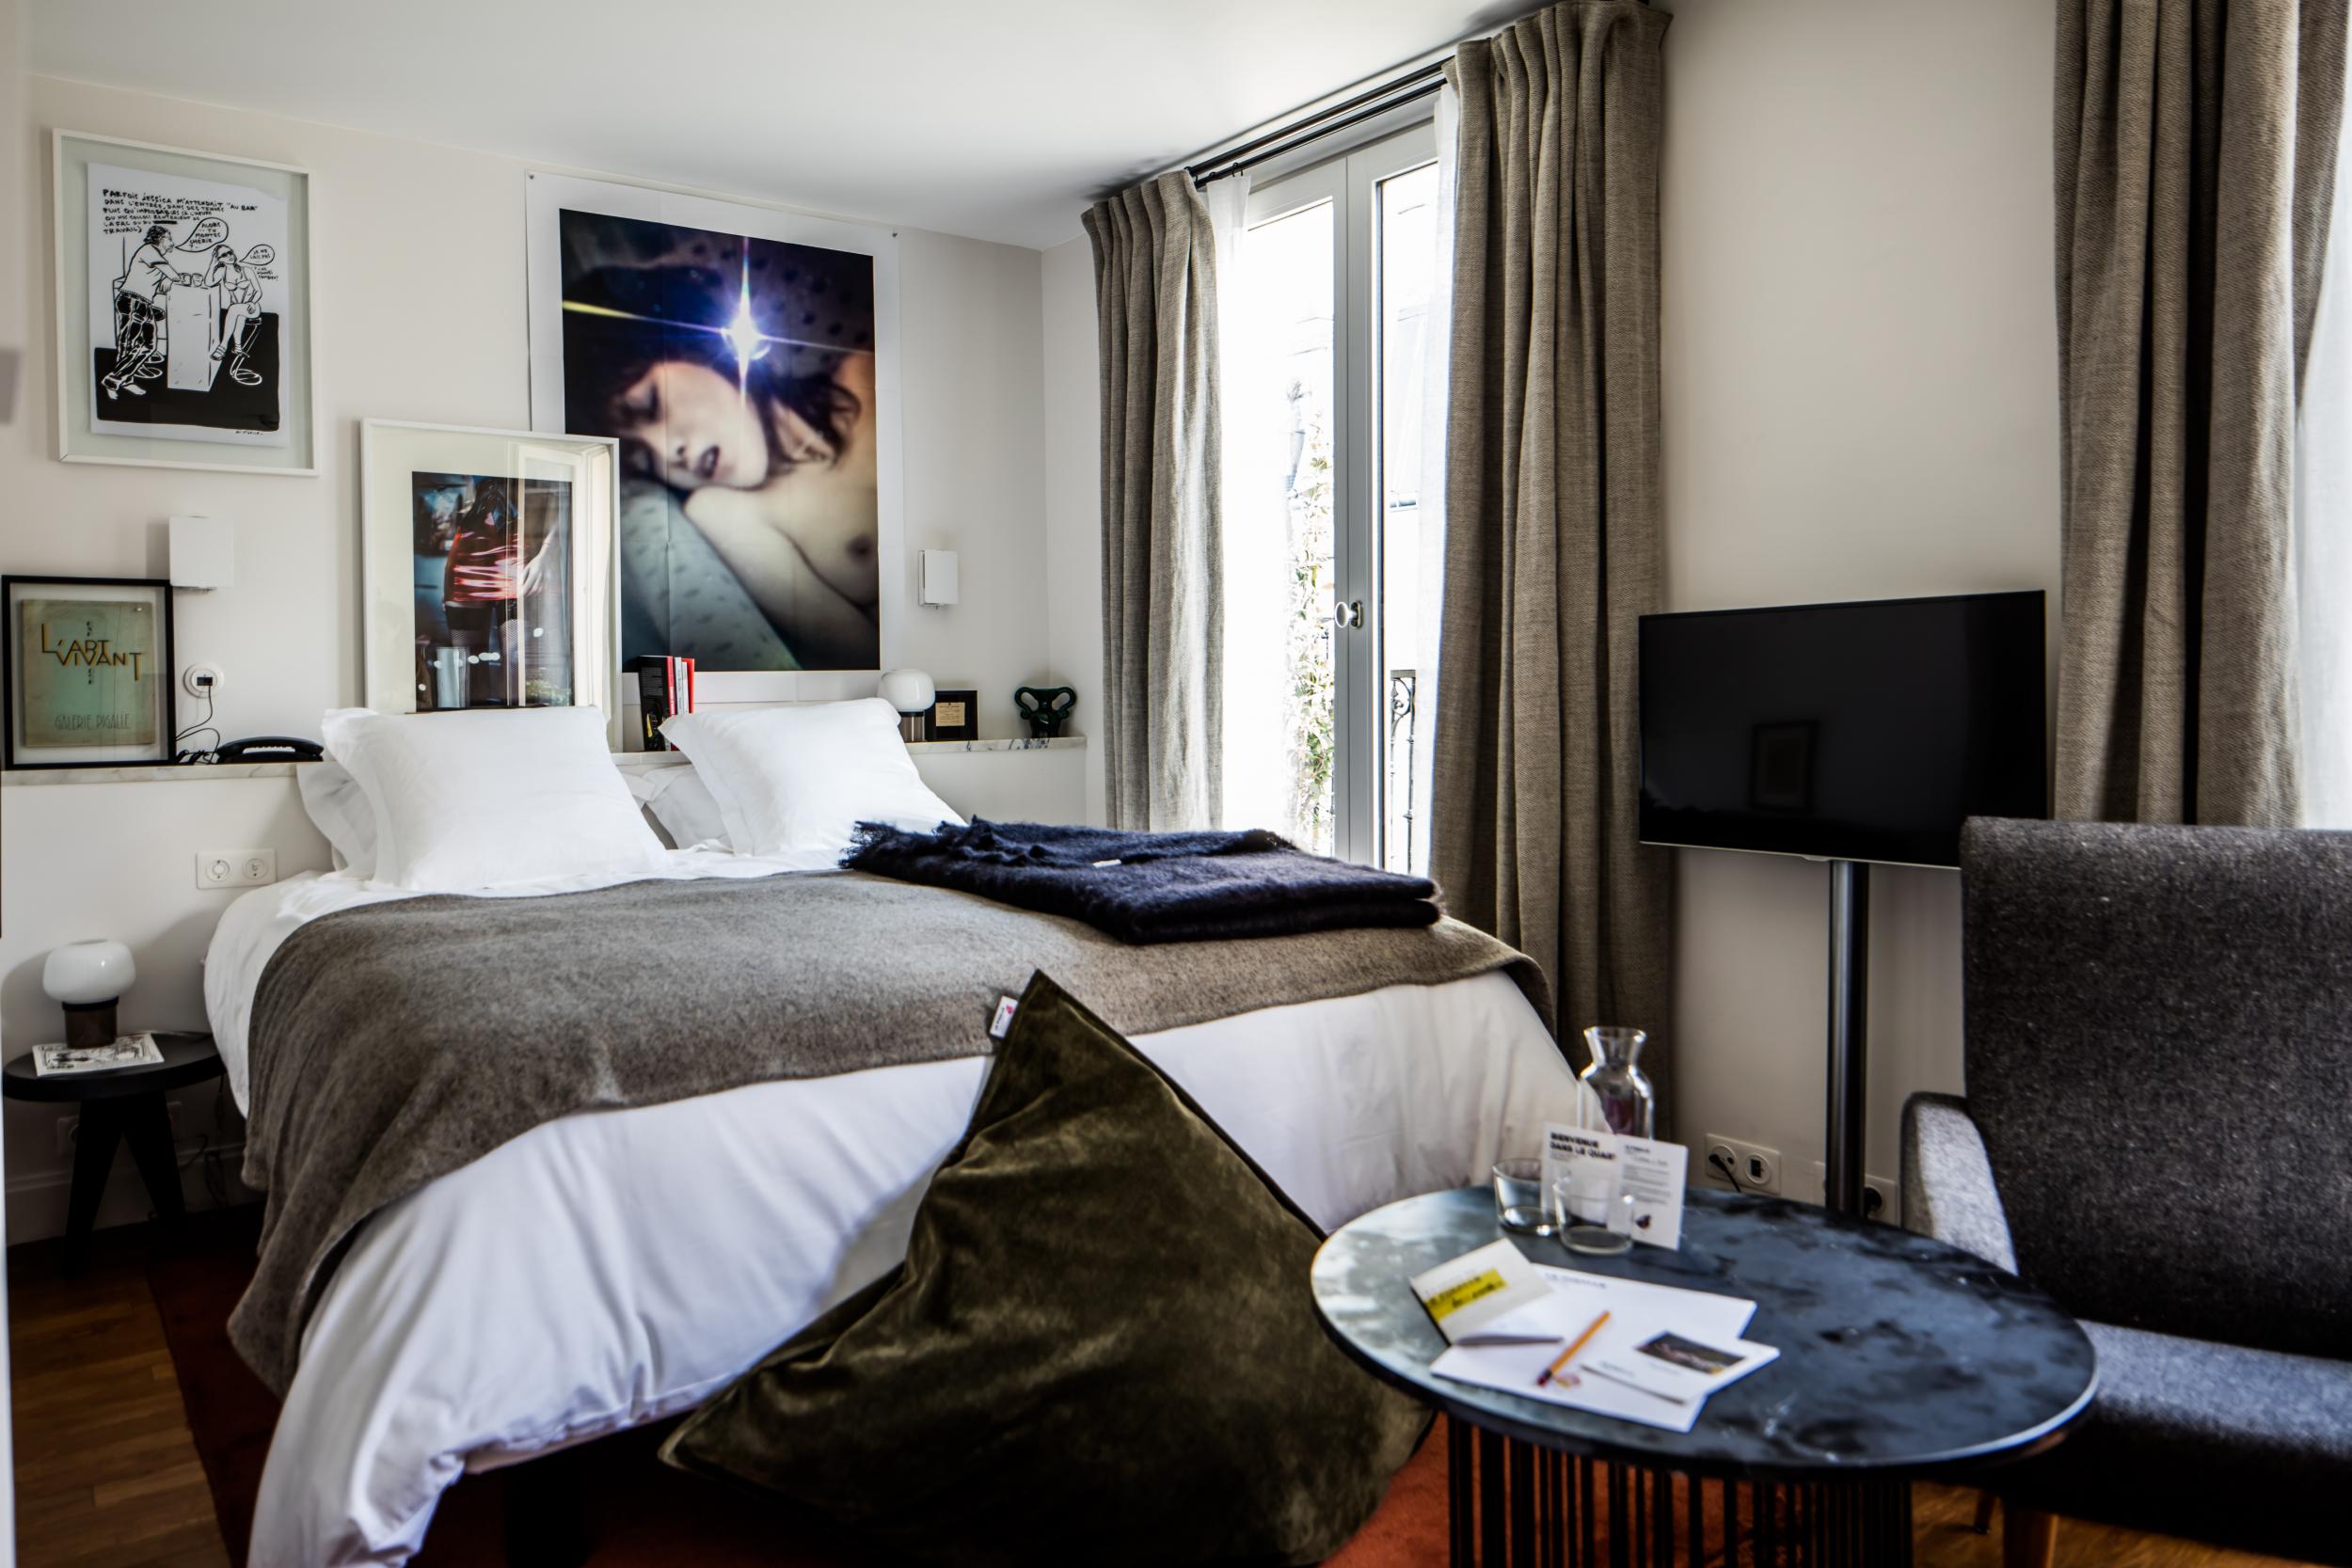 Rooms at Le Pigalle are decorated in the style of the area, known as Nouvelle Athènes, which inspired artists and poets in the late 19th century (